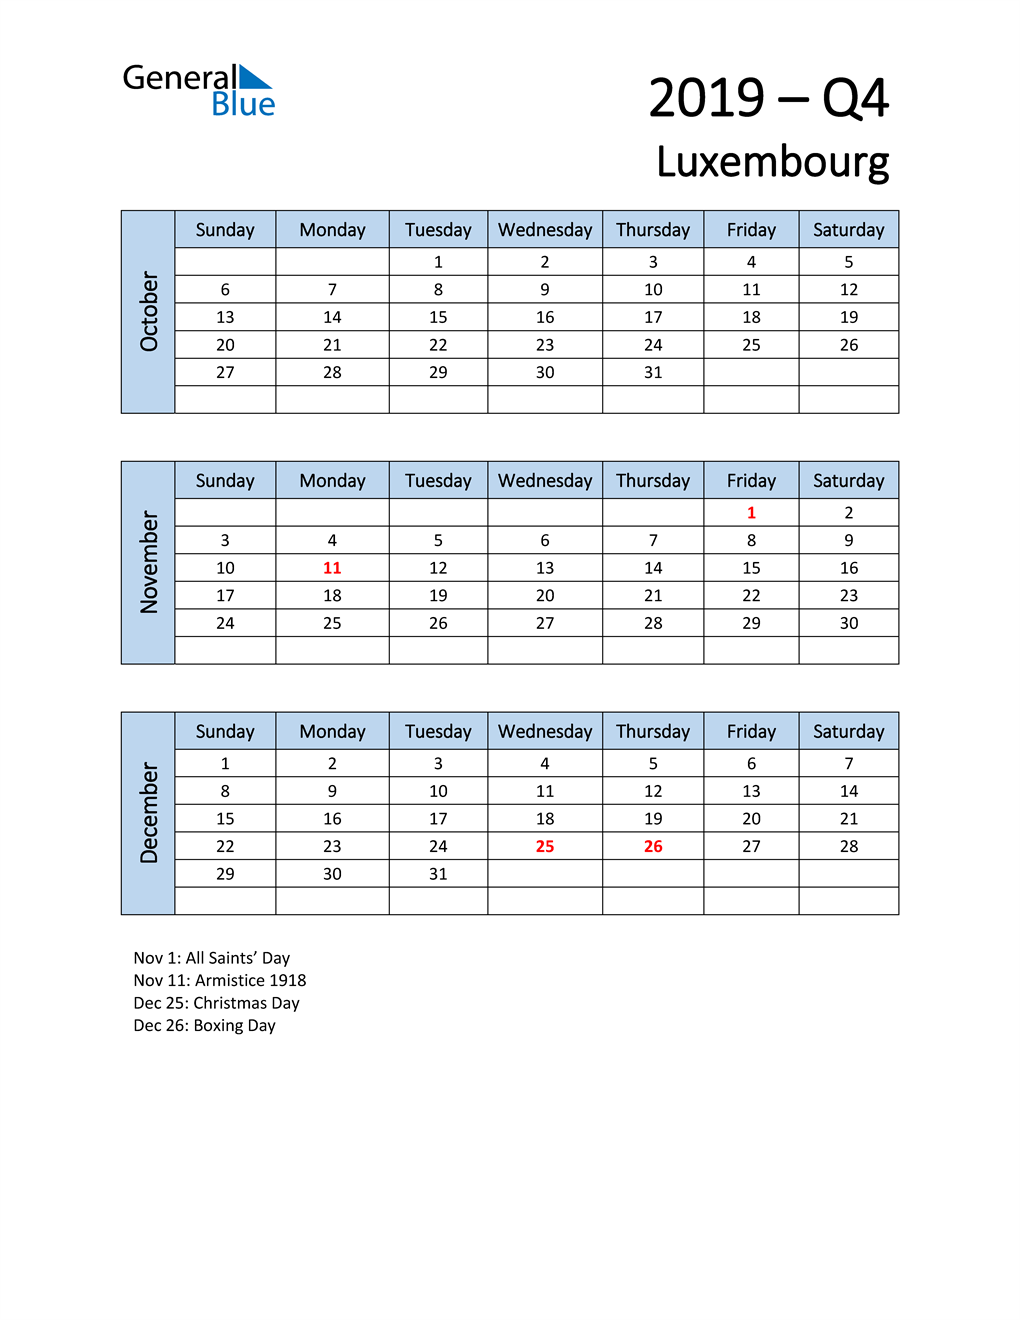  Free Q4 2019 Calendar for Luxembourg